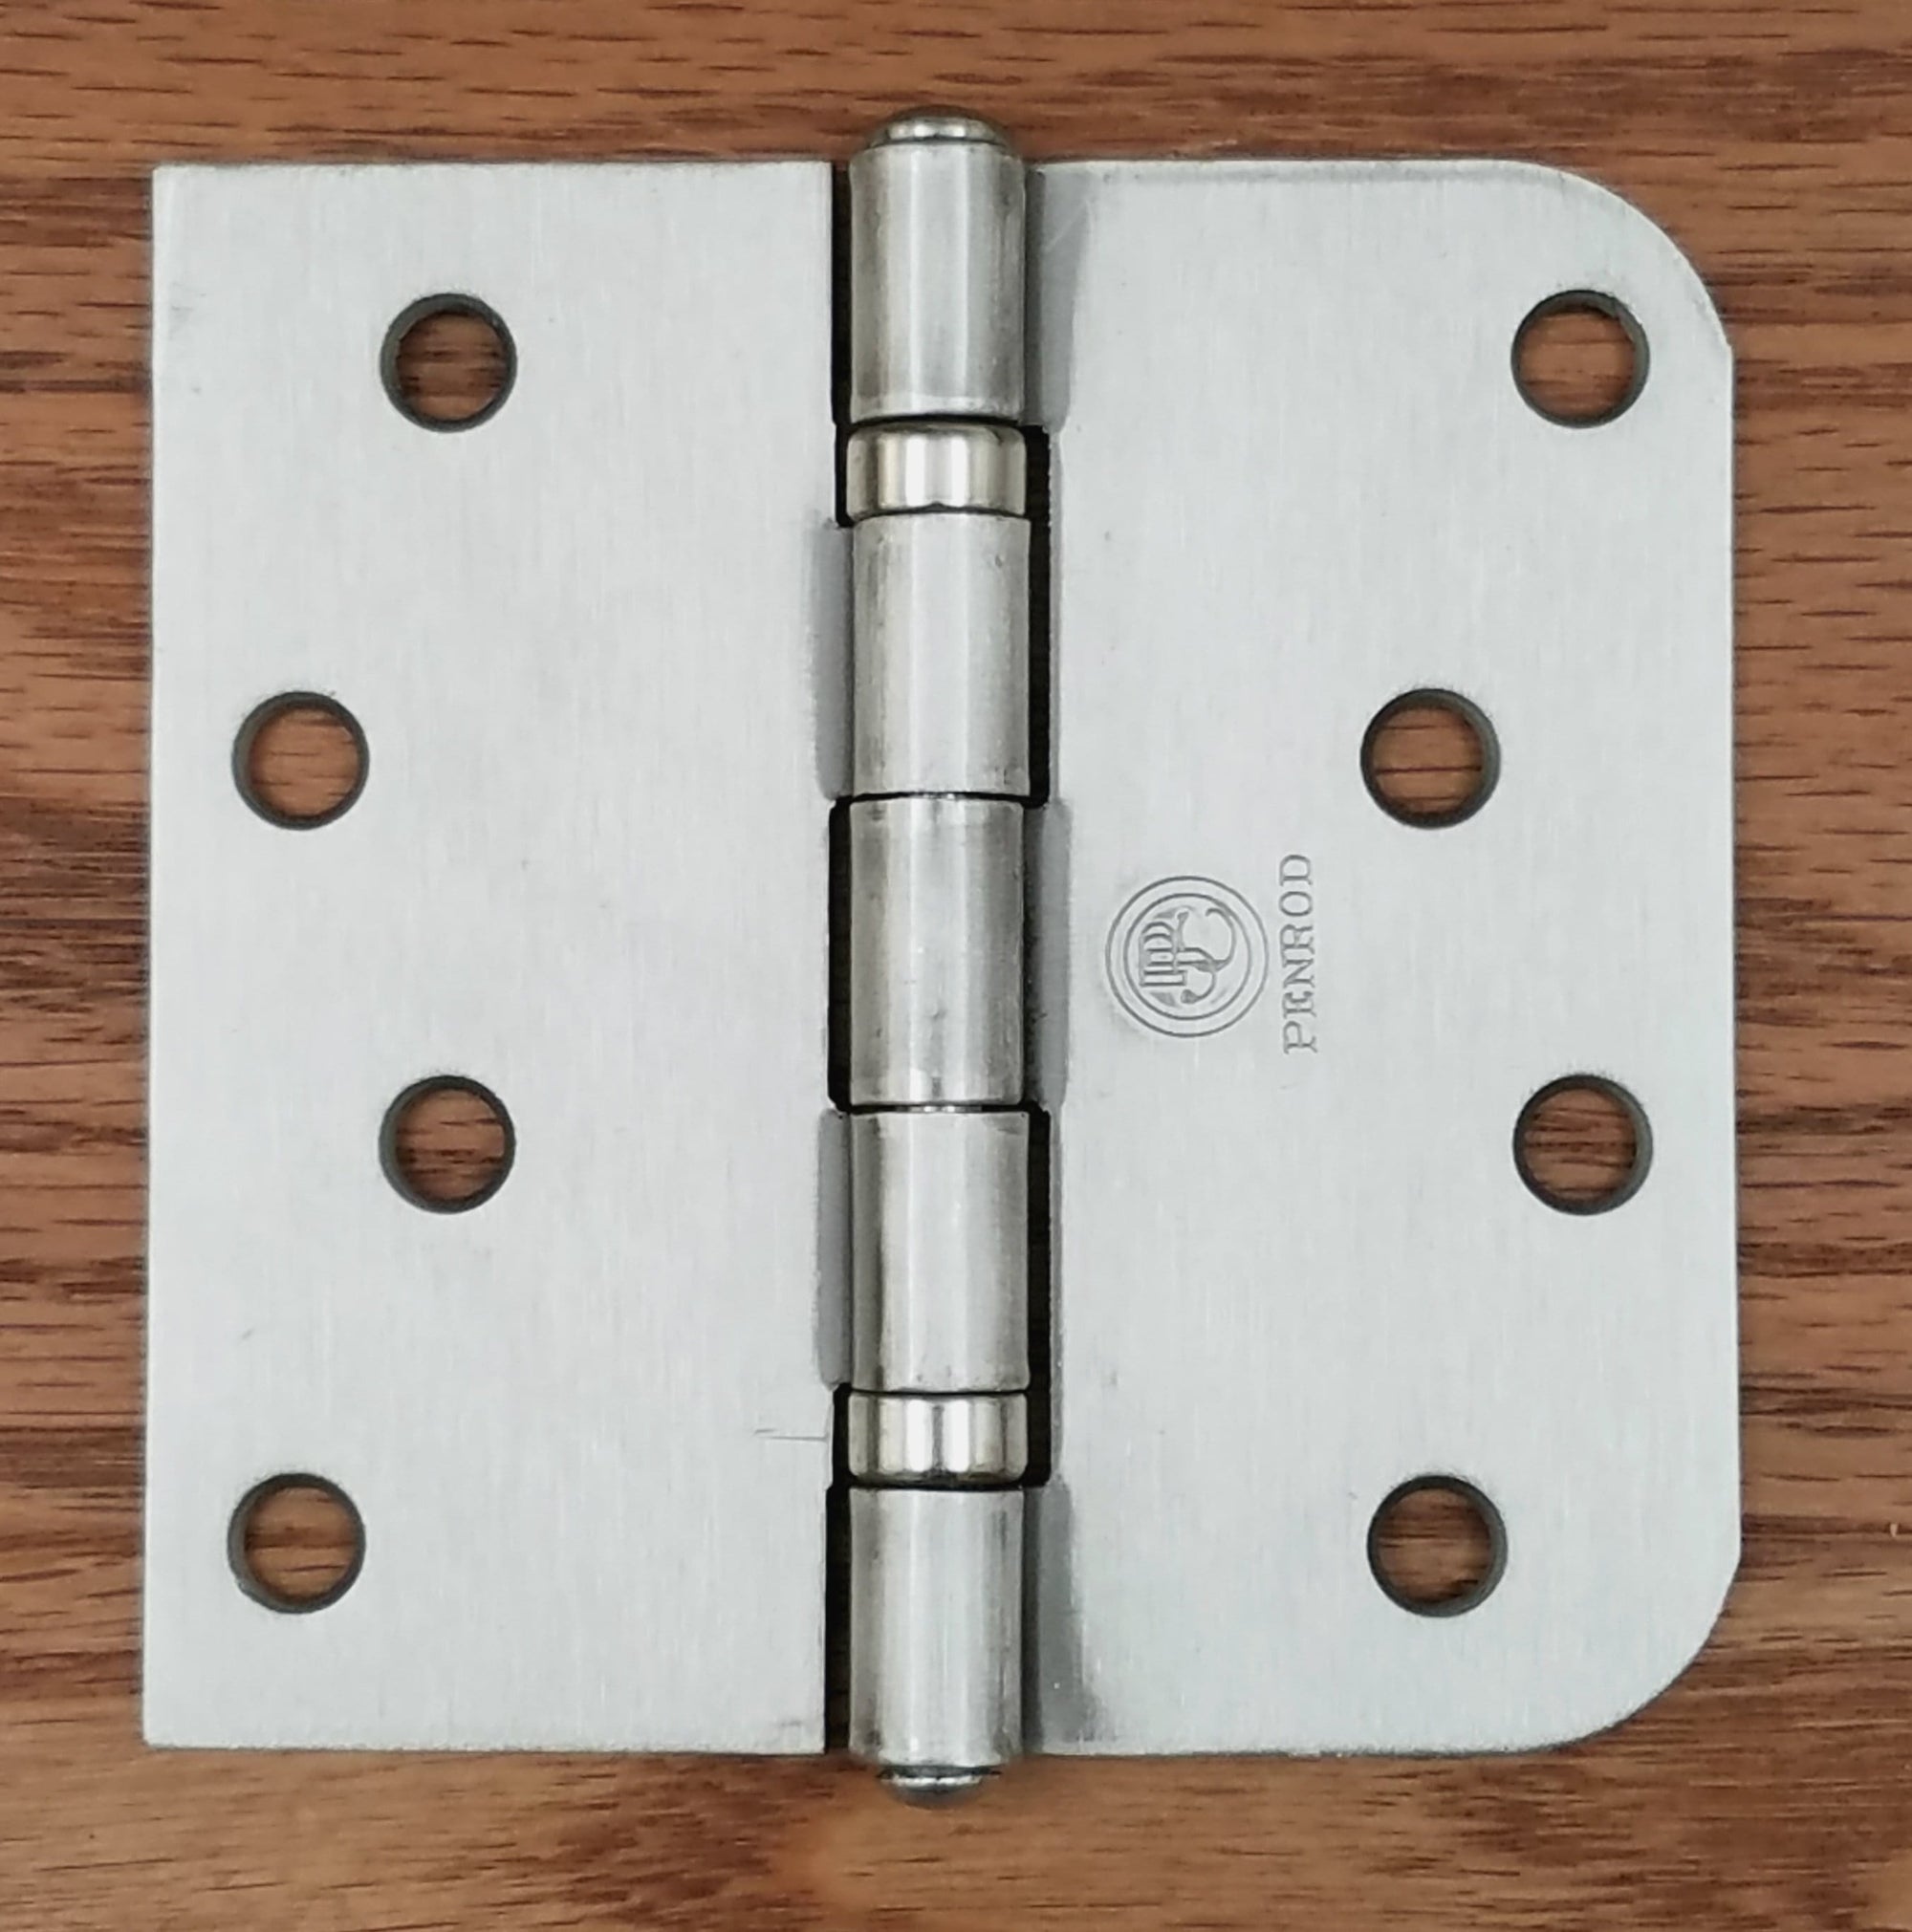 Satin Nickel Penrod Ball Bearing Security Hinges - 4" With 5/8" Radius Square - Non-Removable Riveted Pin - 3 Pack